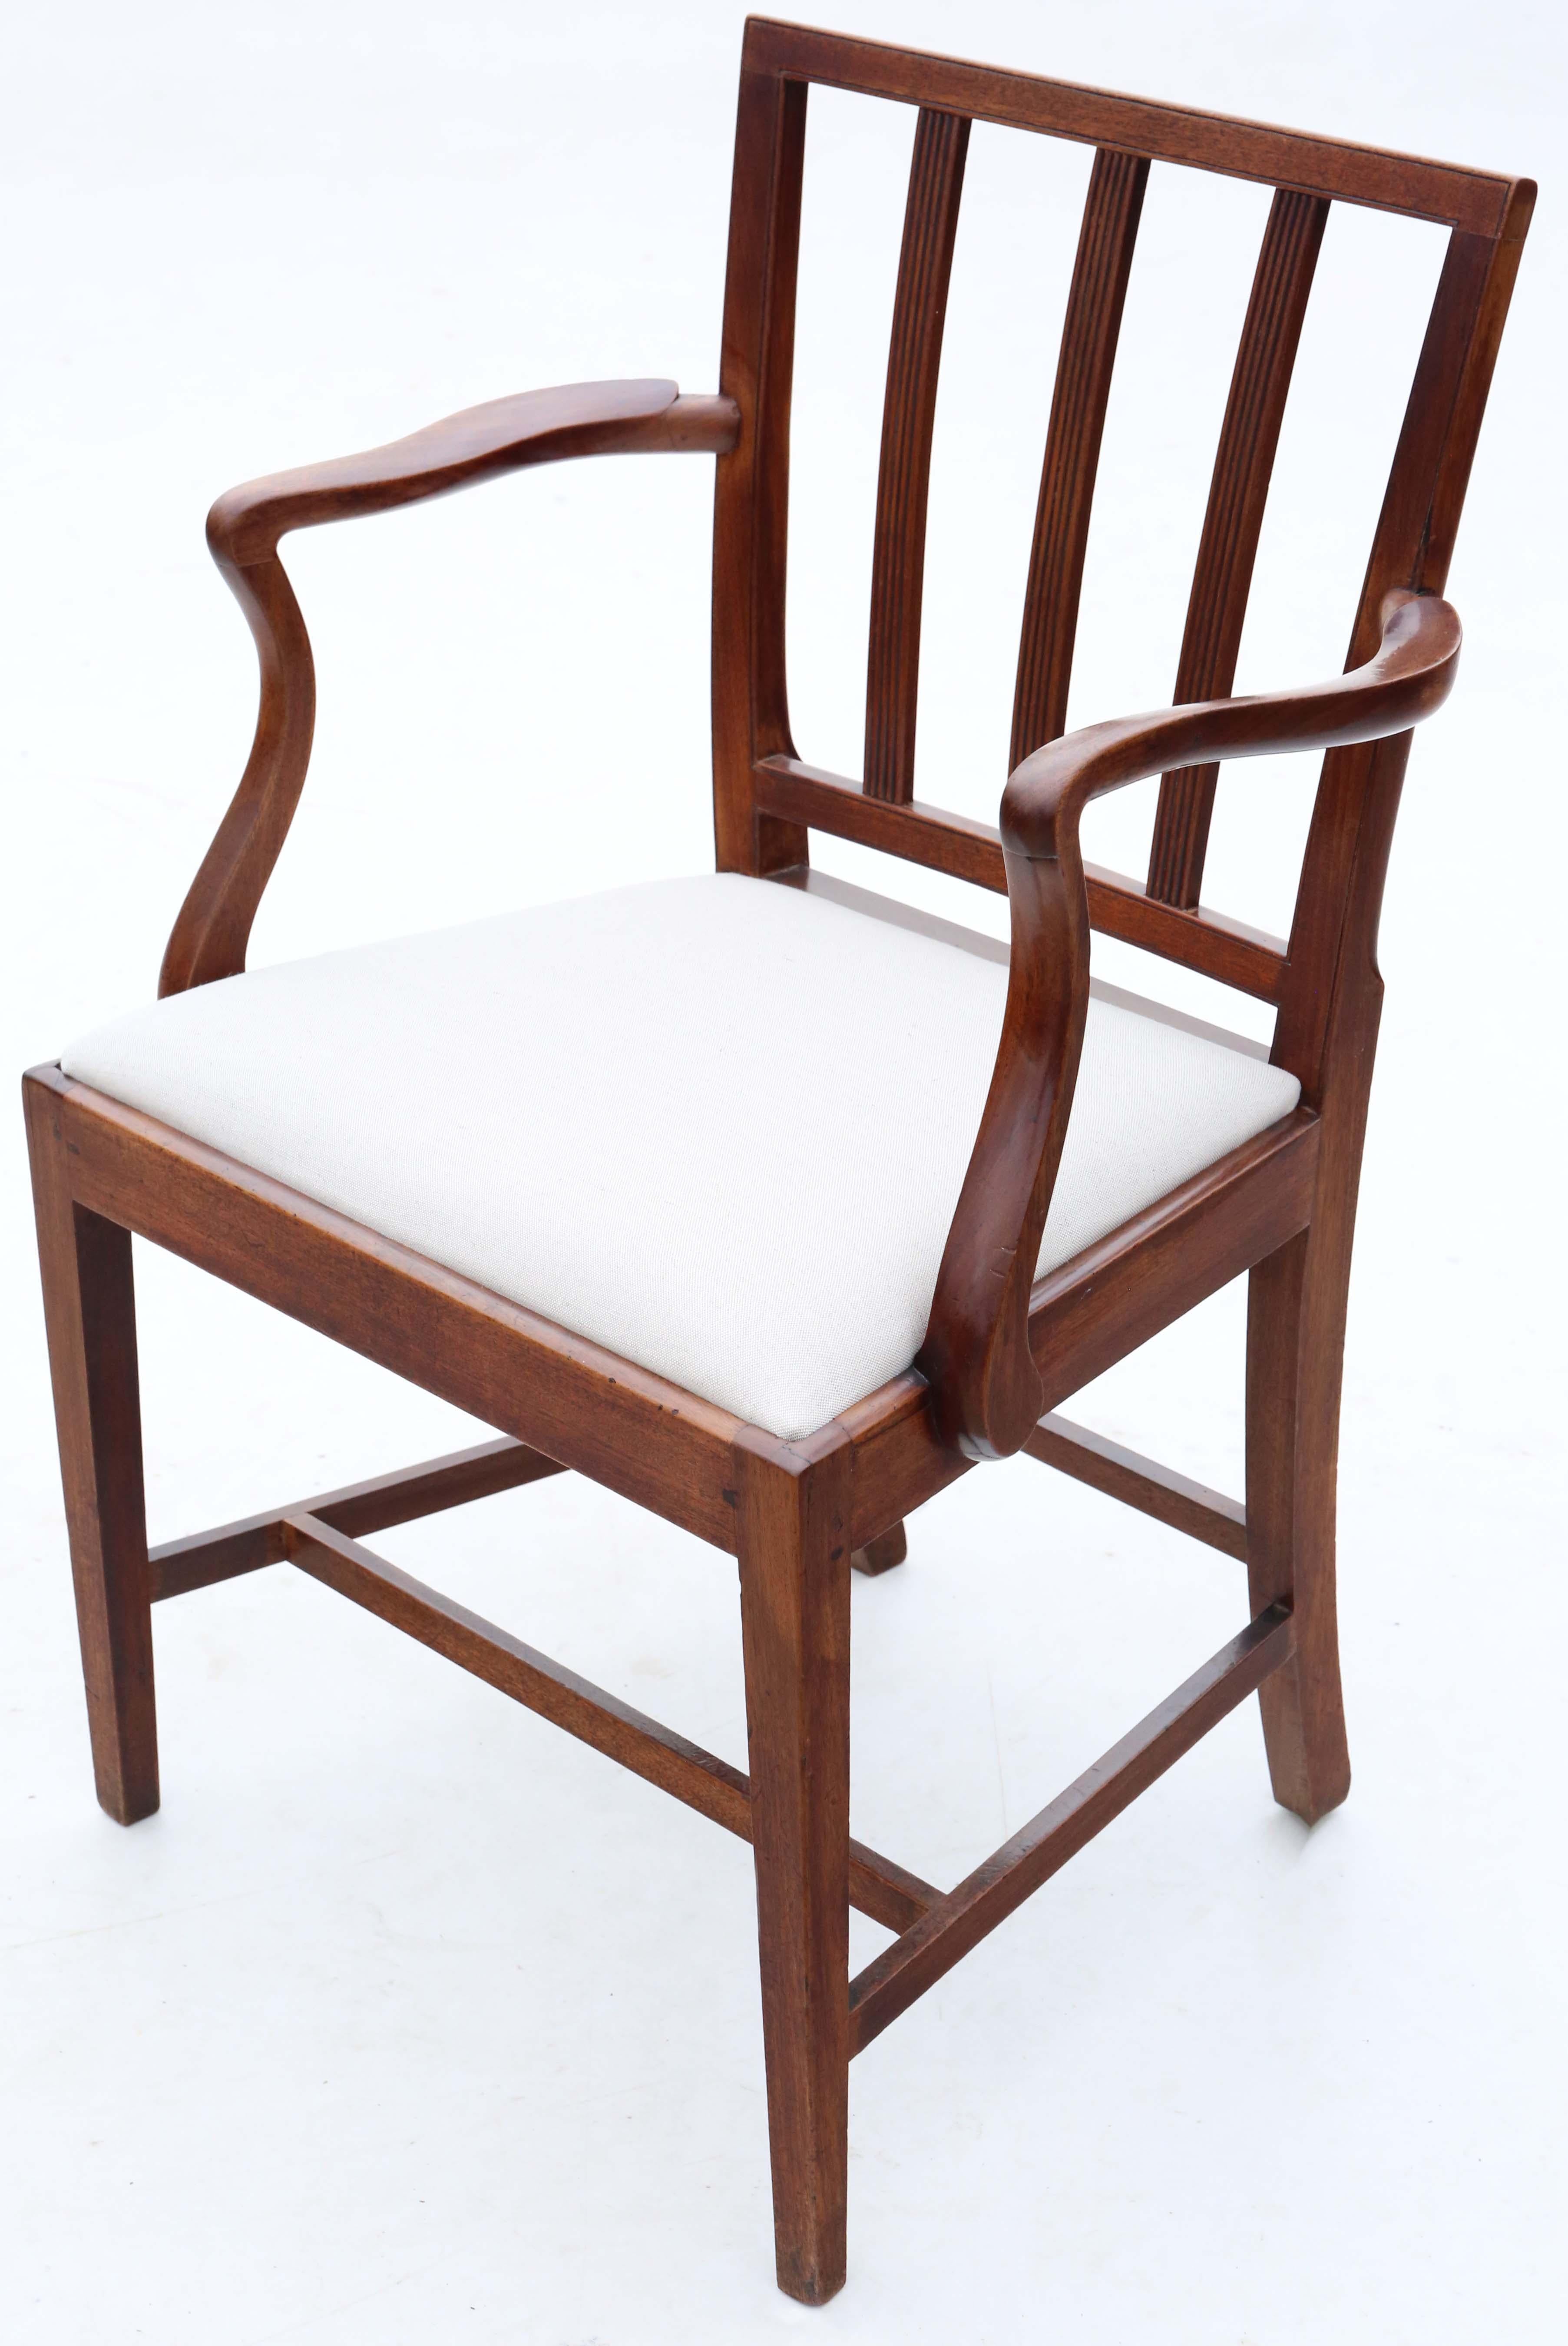 Wood Regency Mahogany Dining Chairs: Set of 8 (6+2), Antique Quality, Early 19th C For Sale